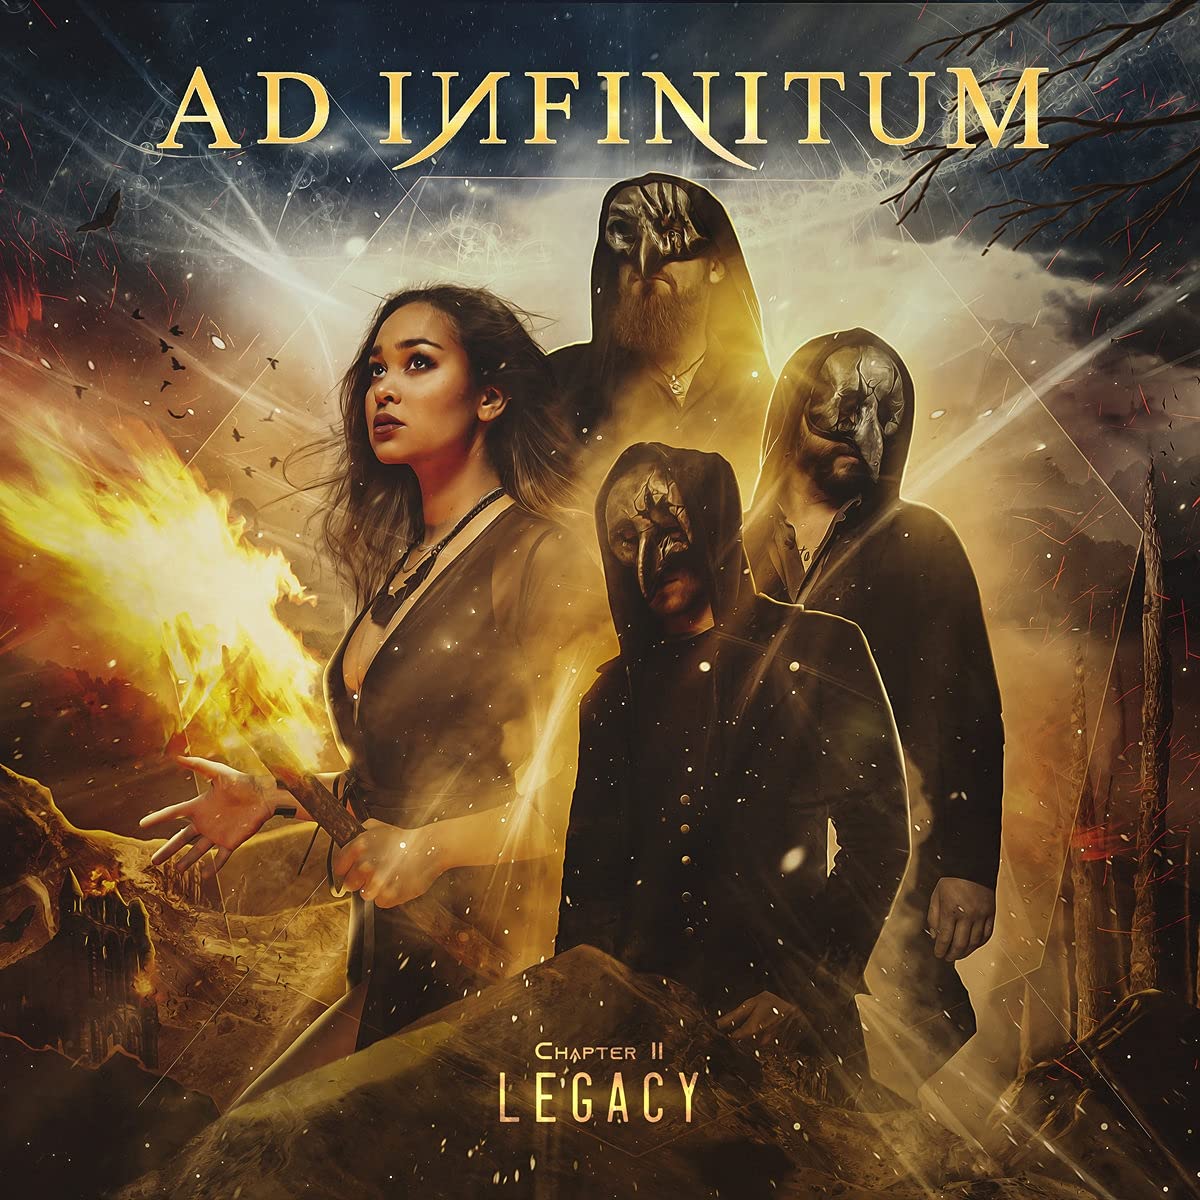 Review: Ad Infinitum “Chapter II: Legacy”